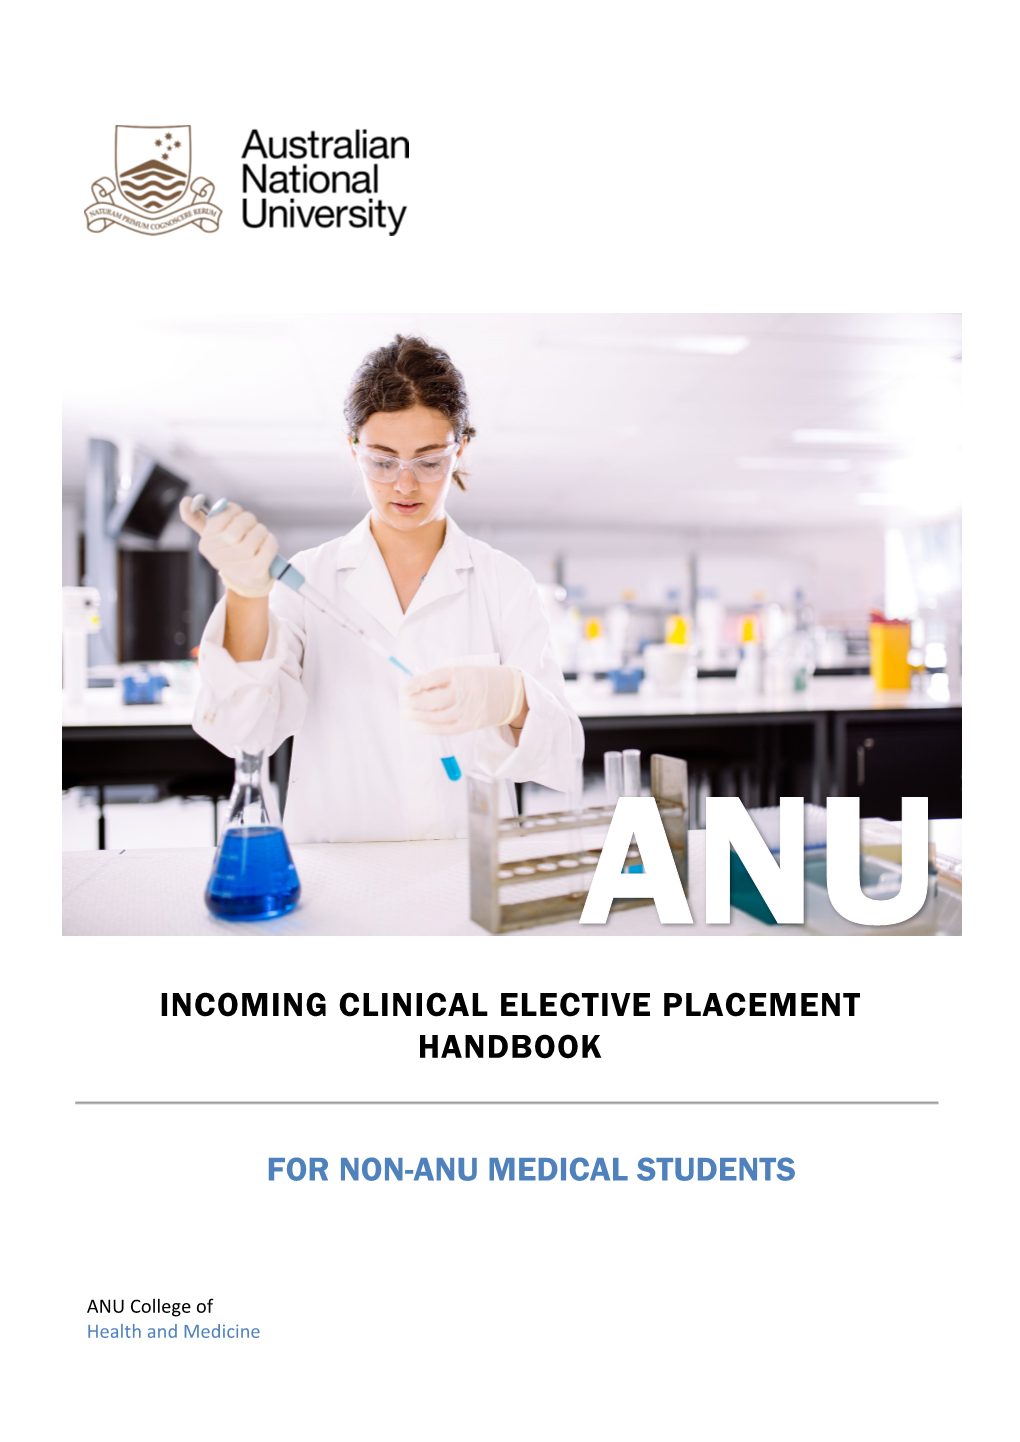 Incoming Clinical Elective Placement Handbook